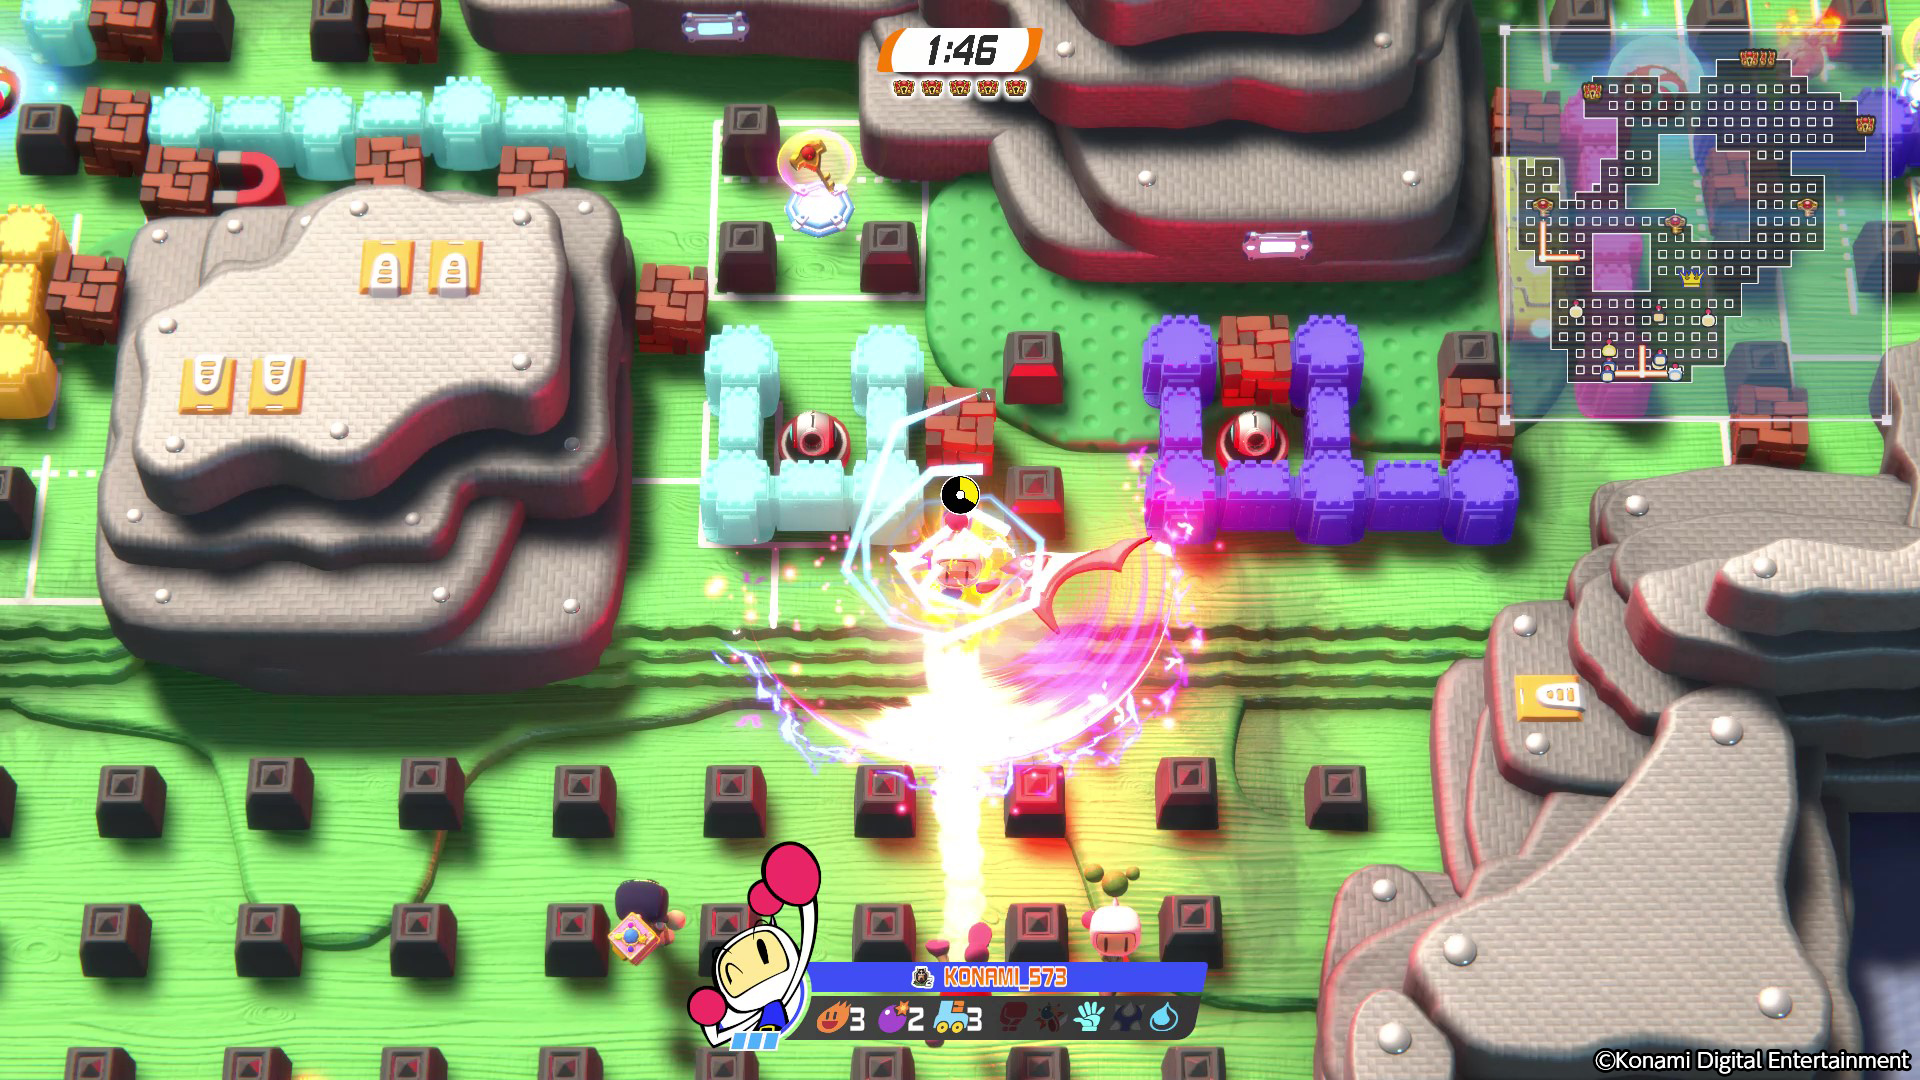 A round of Castle mode in Super Bomberman R 2